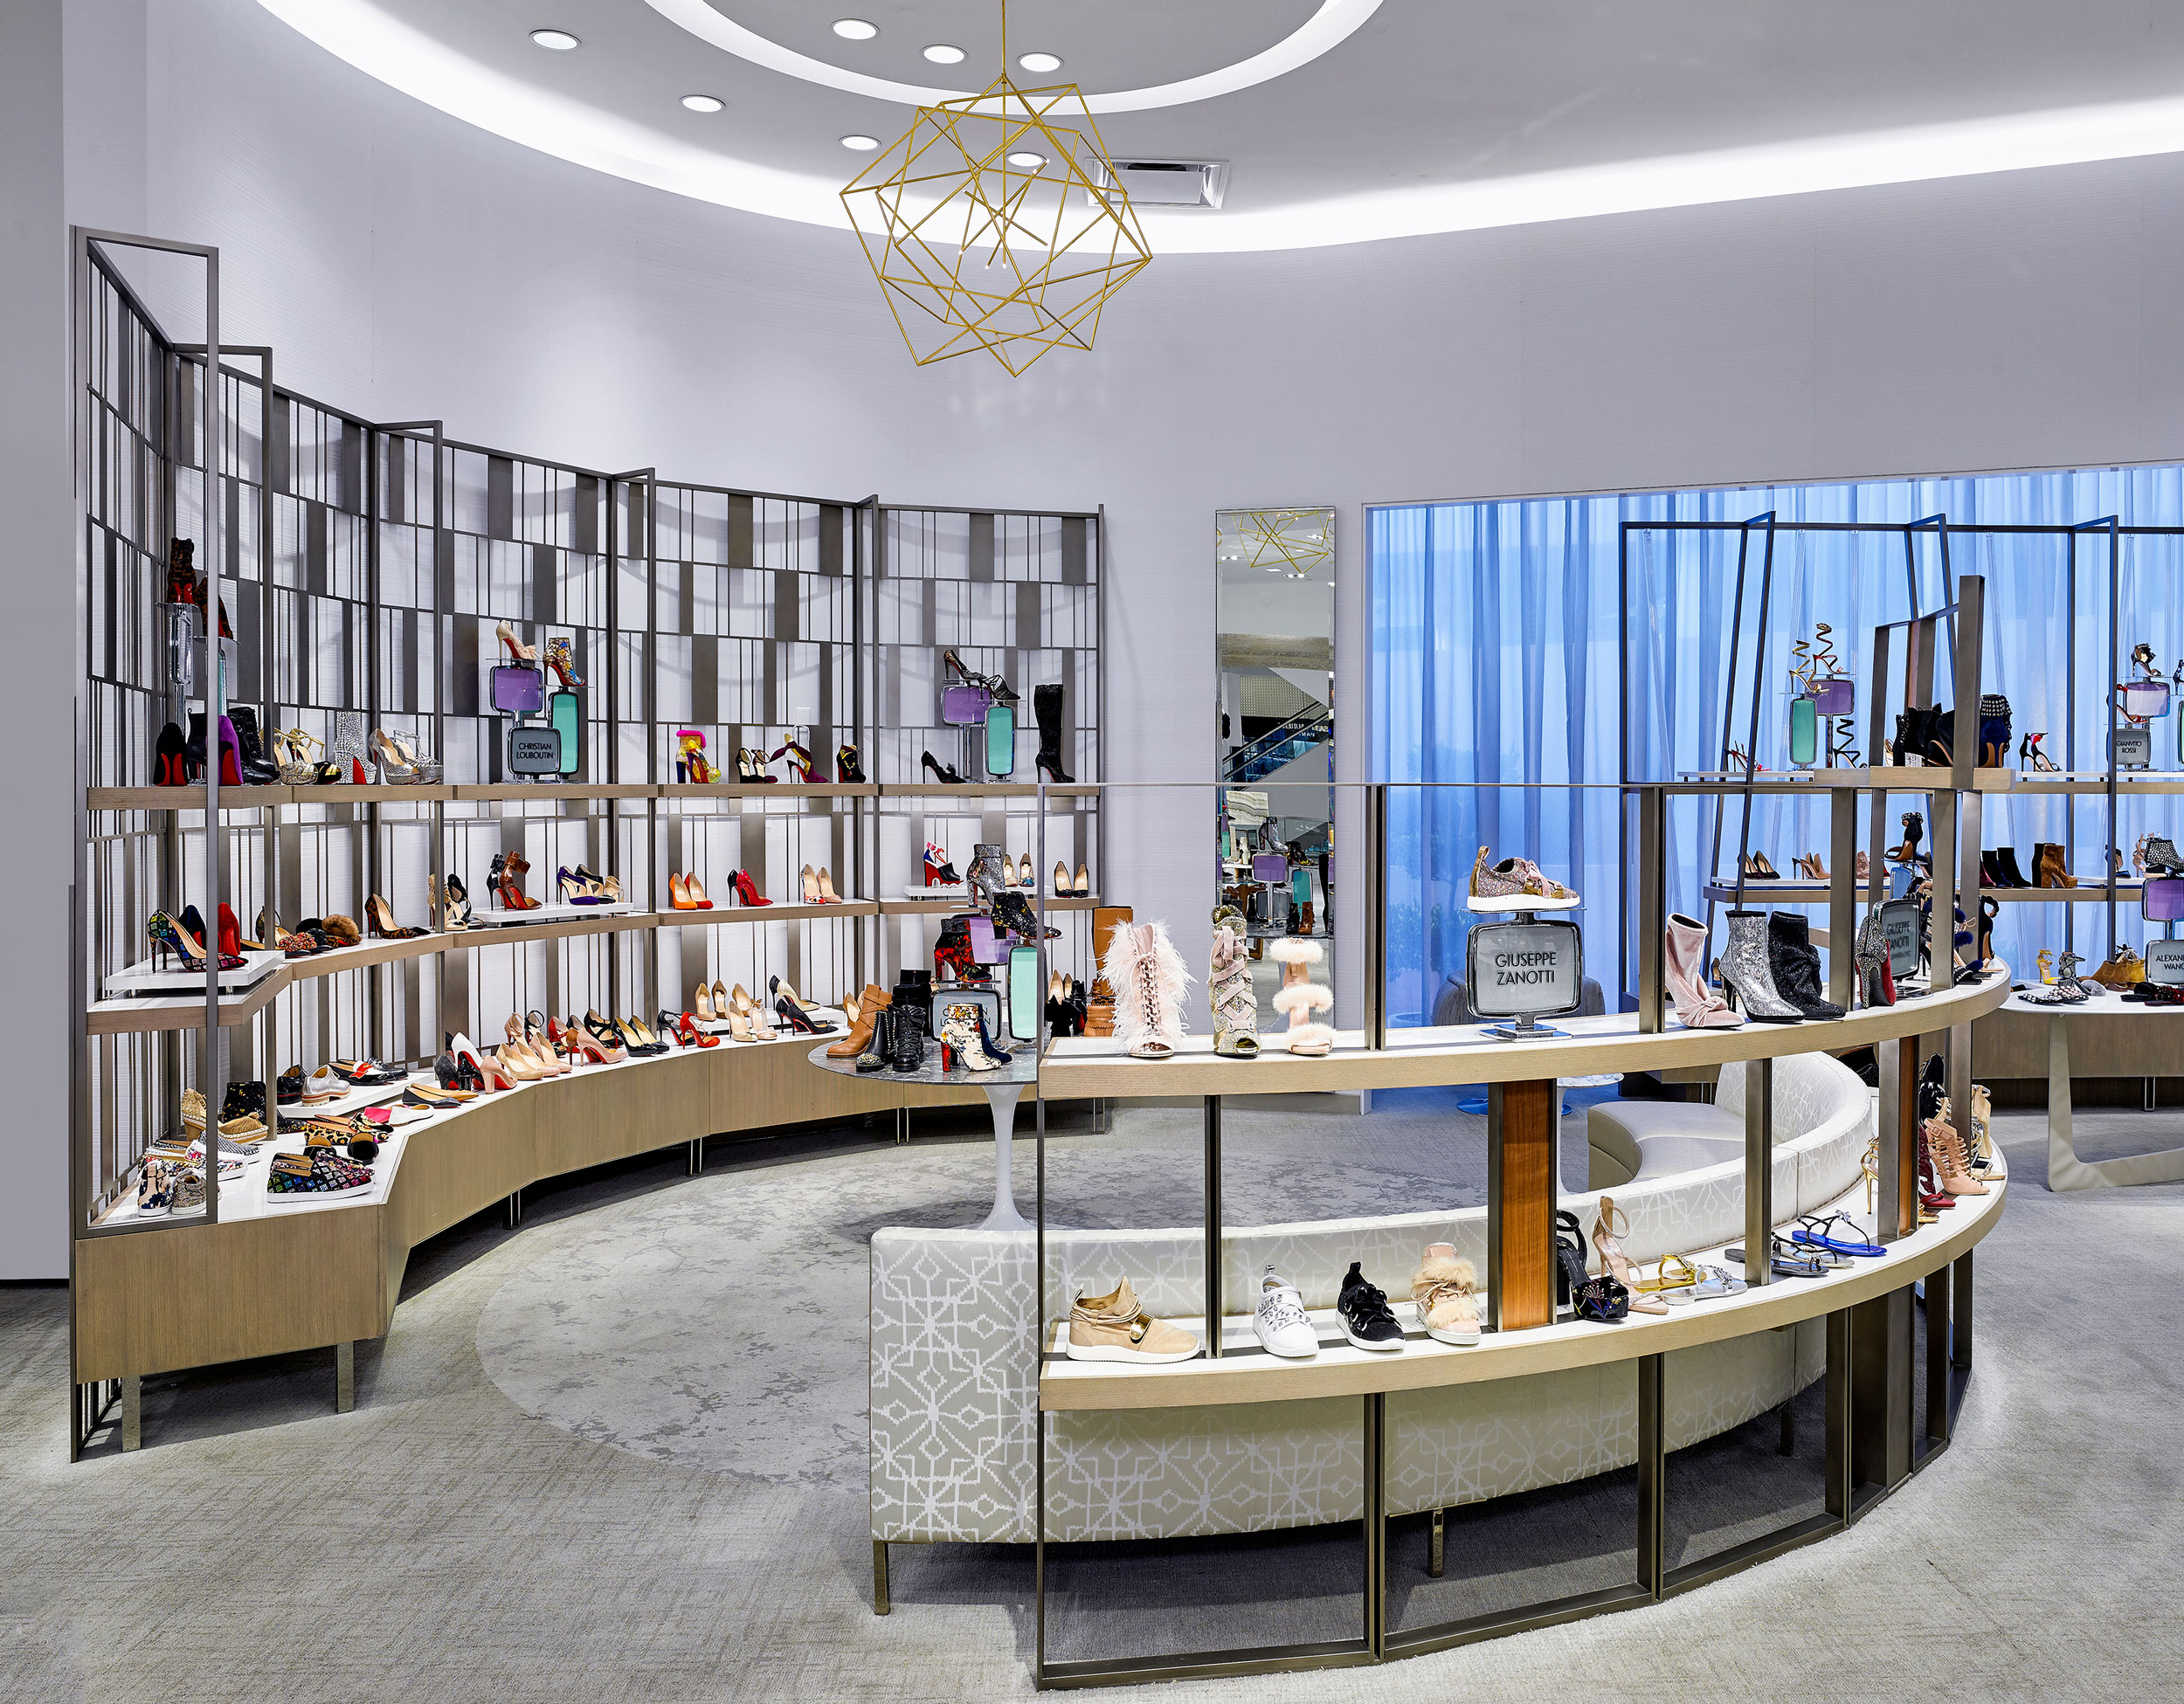 Neiman Marcus Store Wows With Stunning Three-Dimensional Design